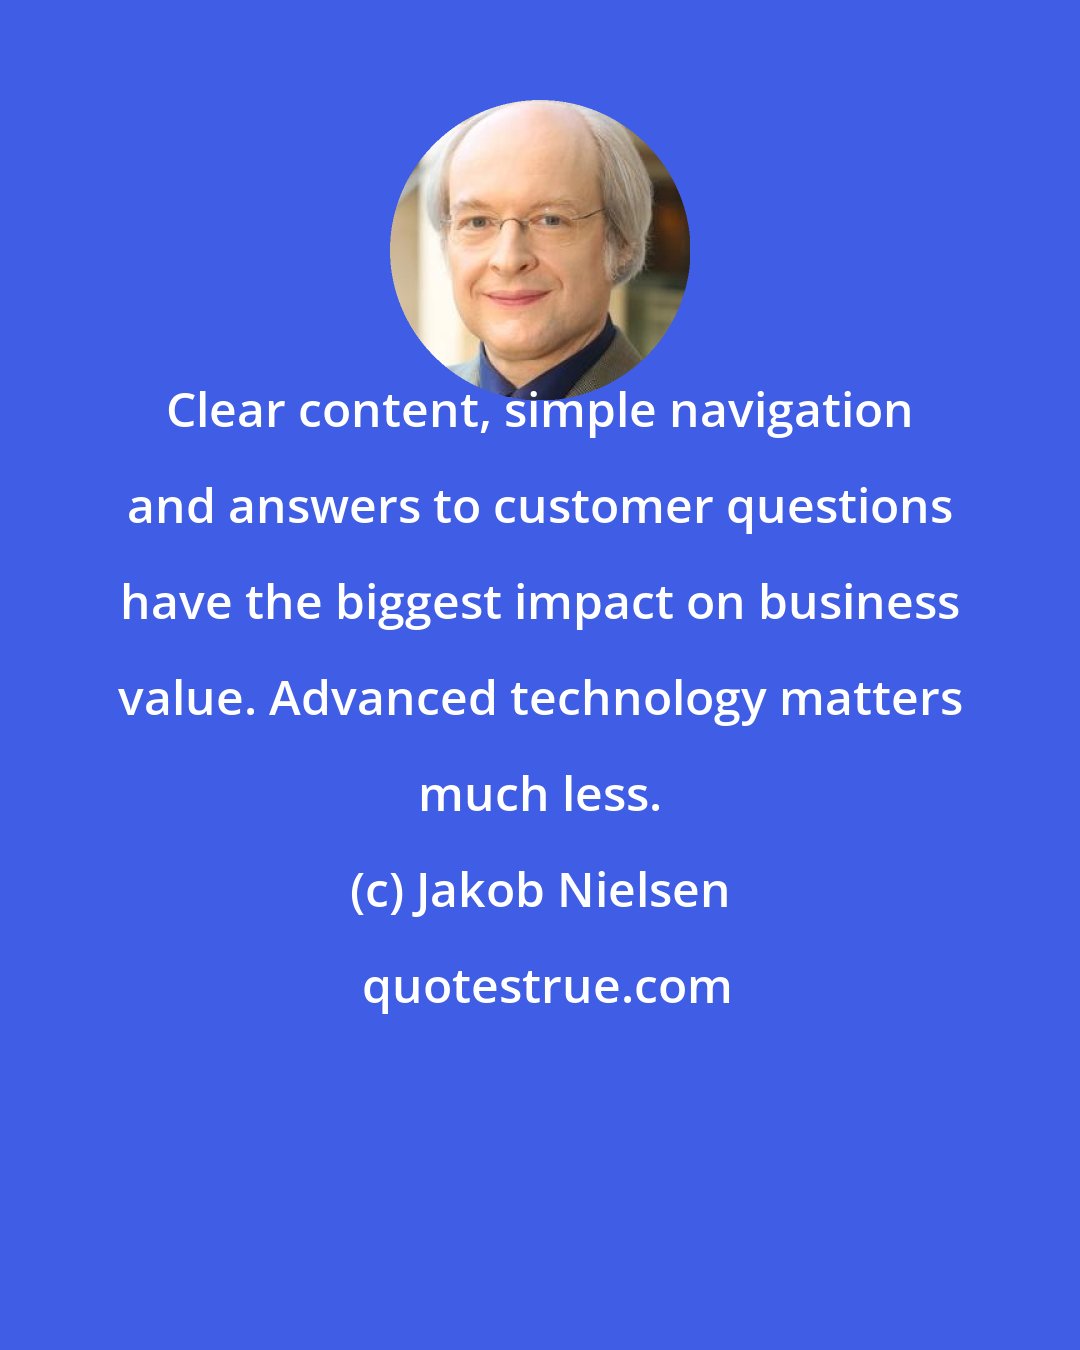 Jakob Nielsen: Clear content, simple navigation and answers to customer questions have the biggest impact on business value. Advanced technology matters much less.